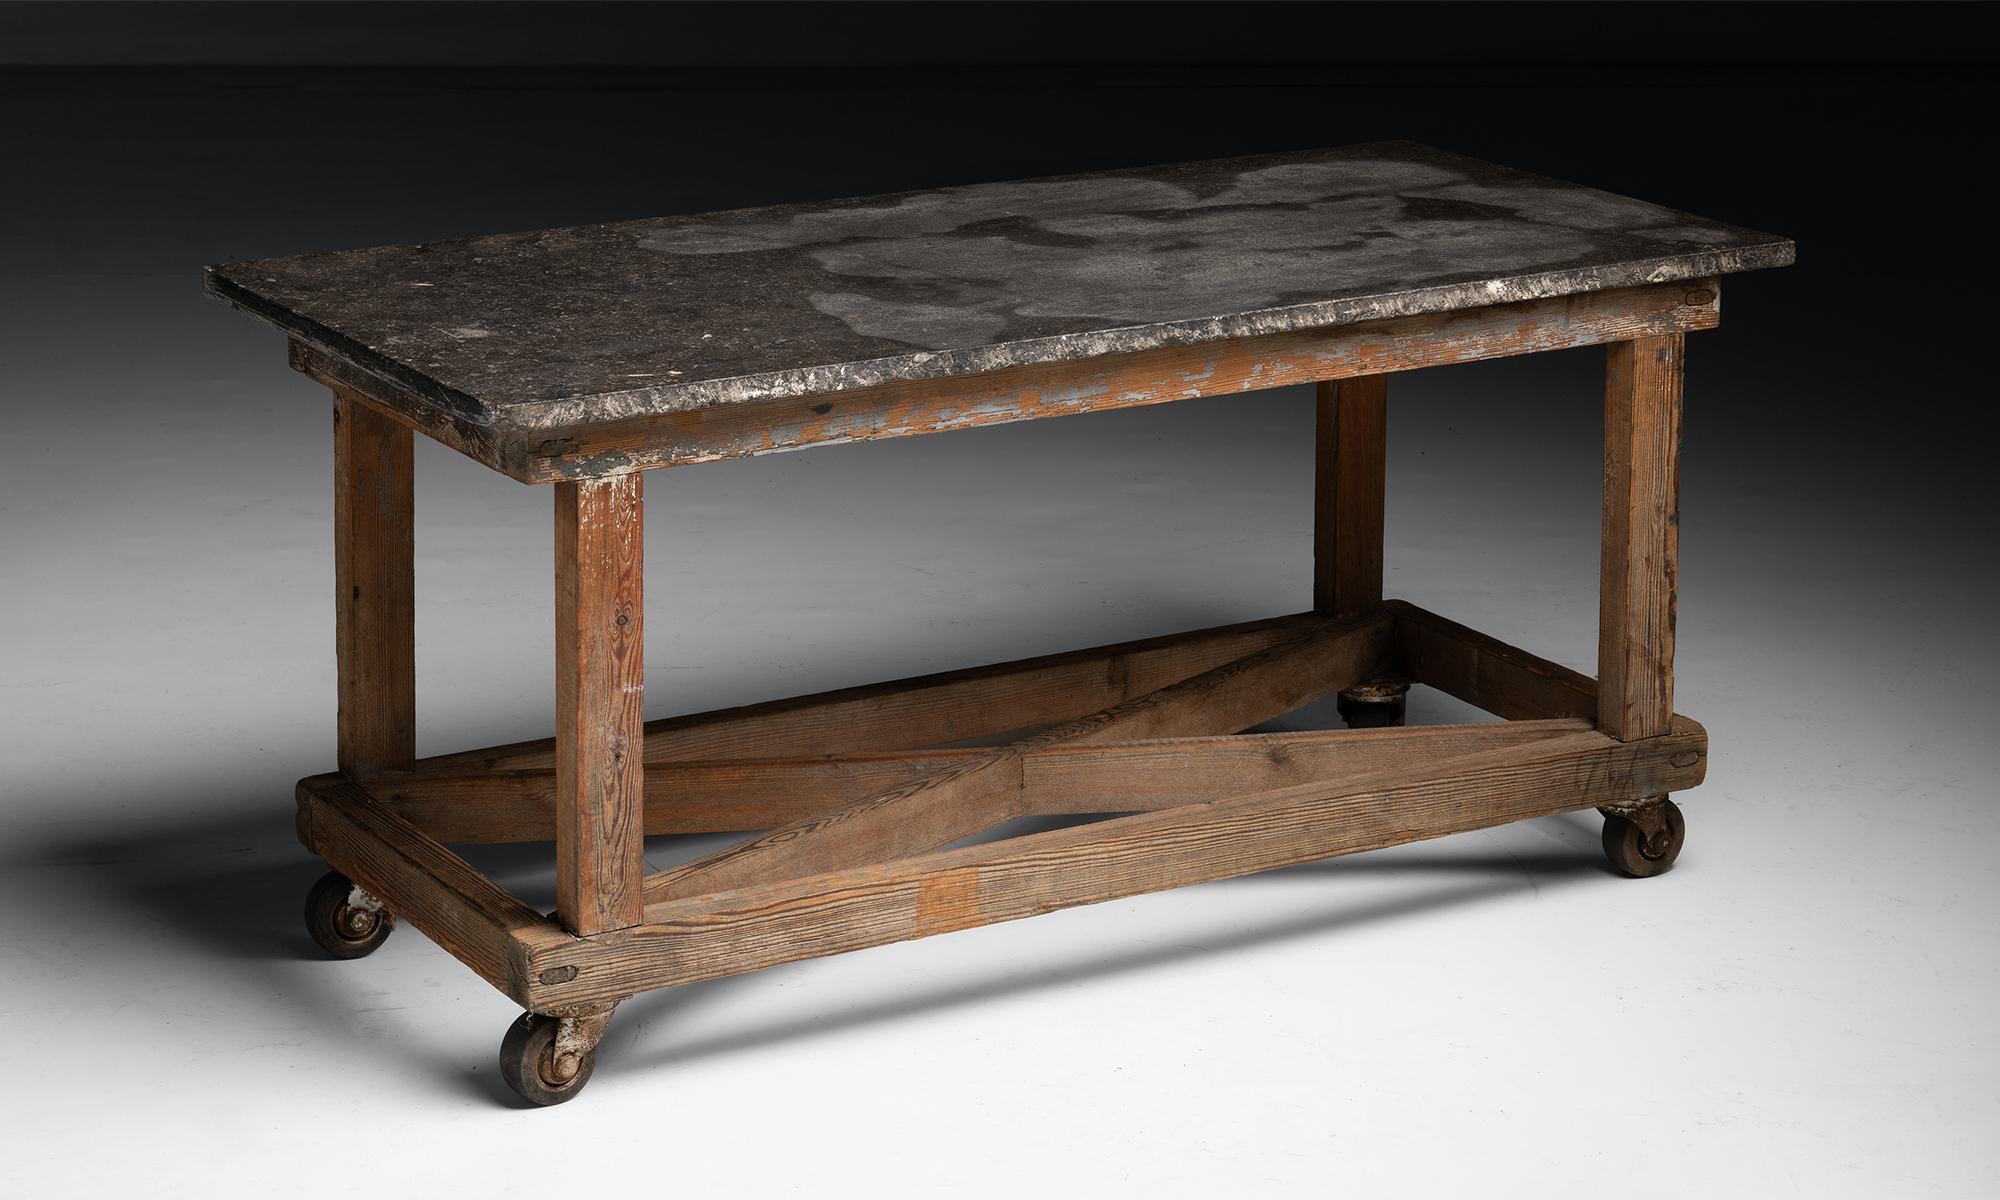 Stone Top Work Table

England circa 1900

Weathered blue stone top on pine base with castors.

51.5”L x 23.5”d x 24.25”h